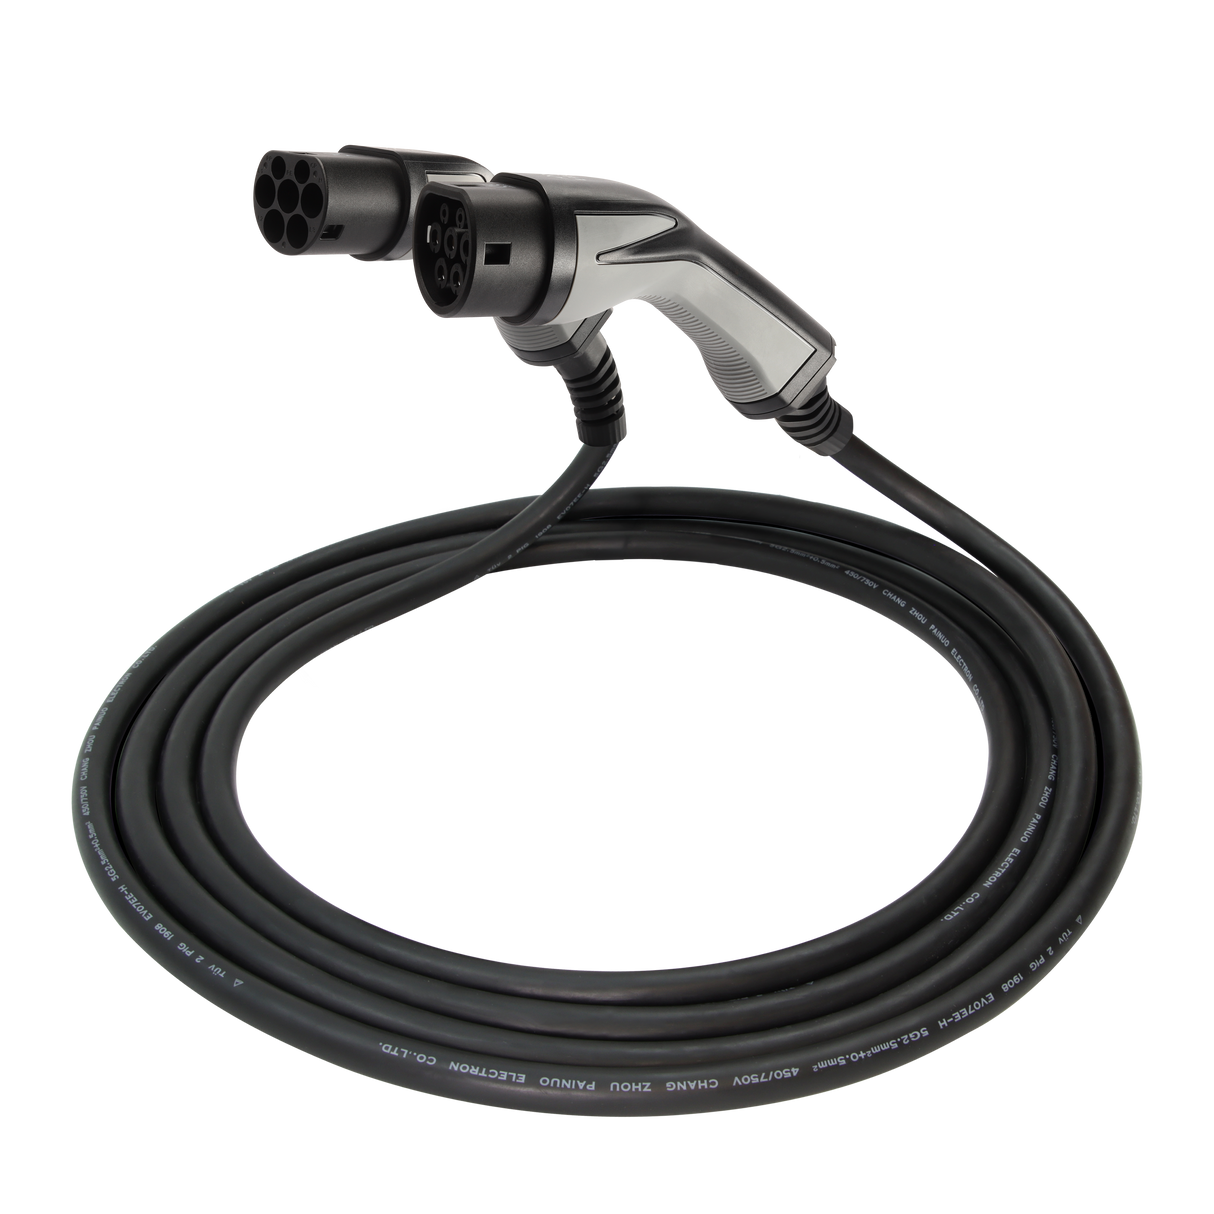 Charging cable Volvo XC60 - Erock Pro Type 2 - 16A 1 phase (3.7 kW)